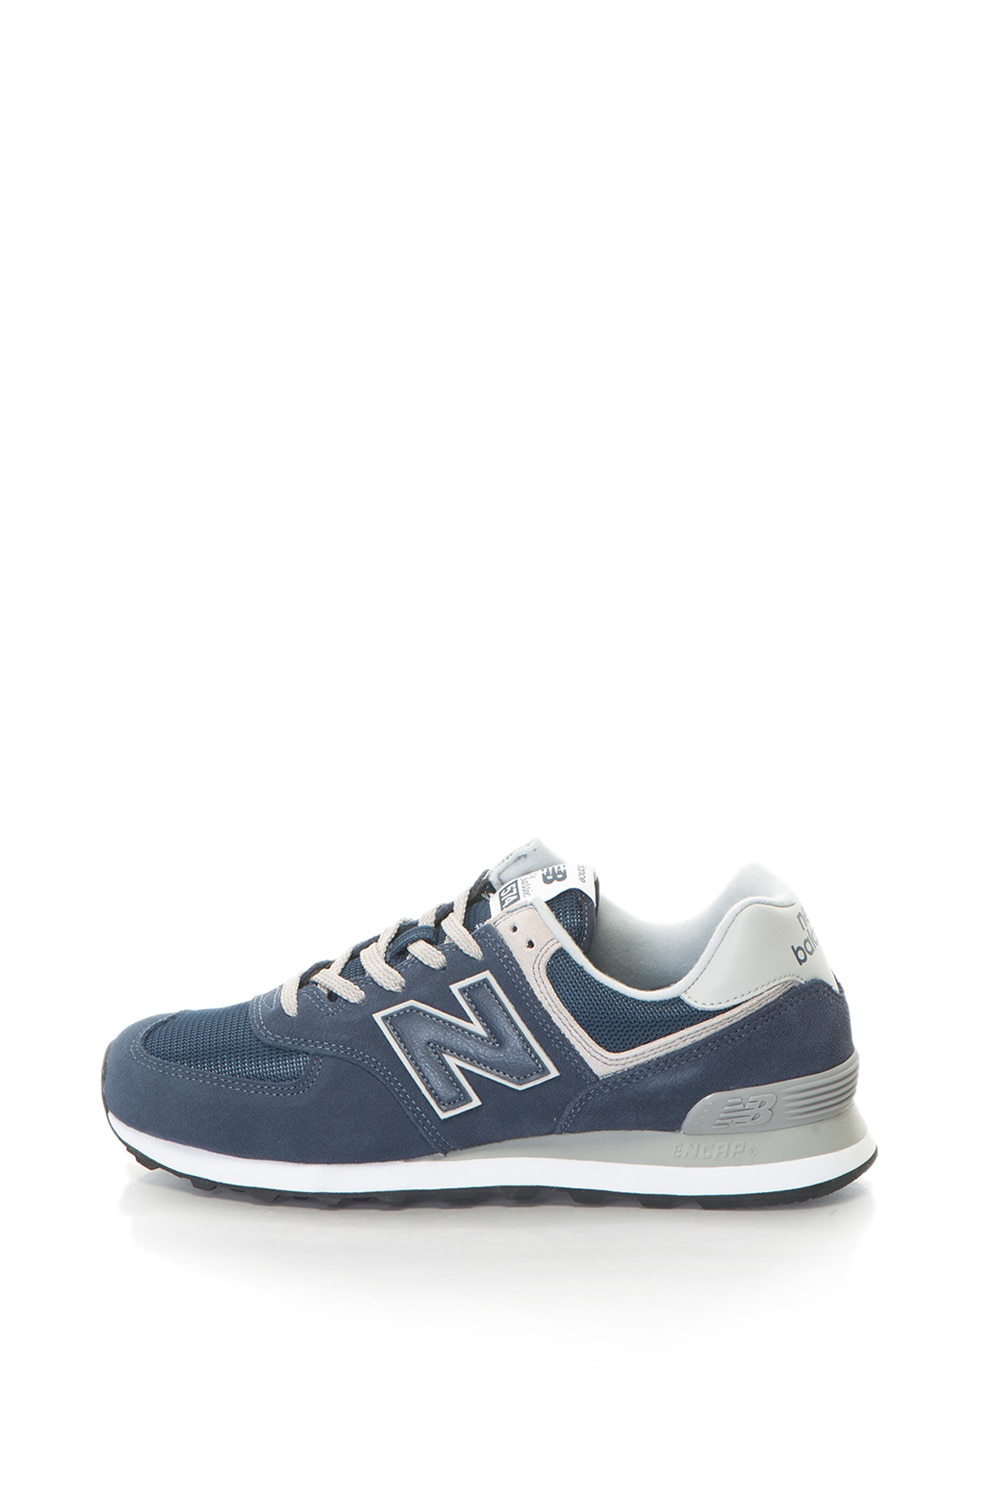 new balance 574 emag off 62% - www 